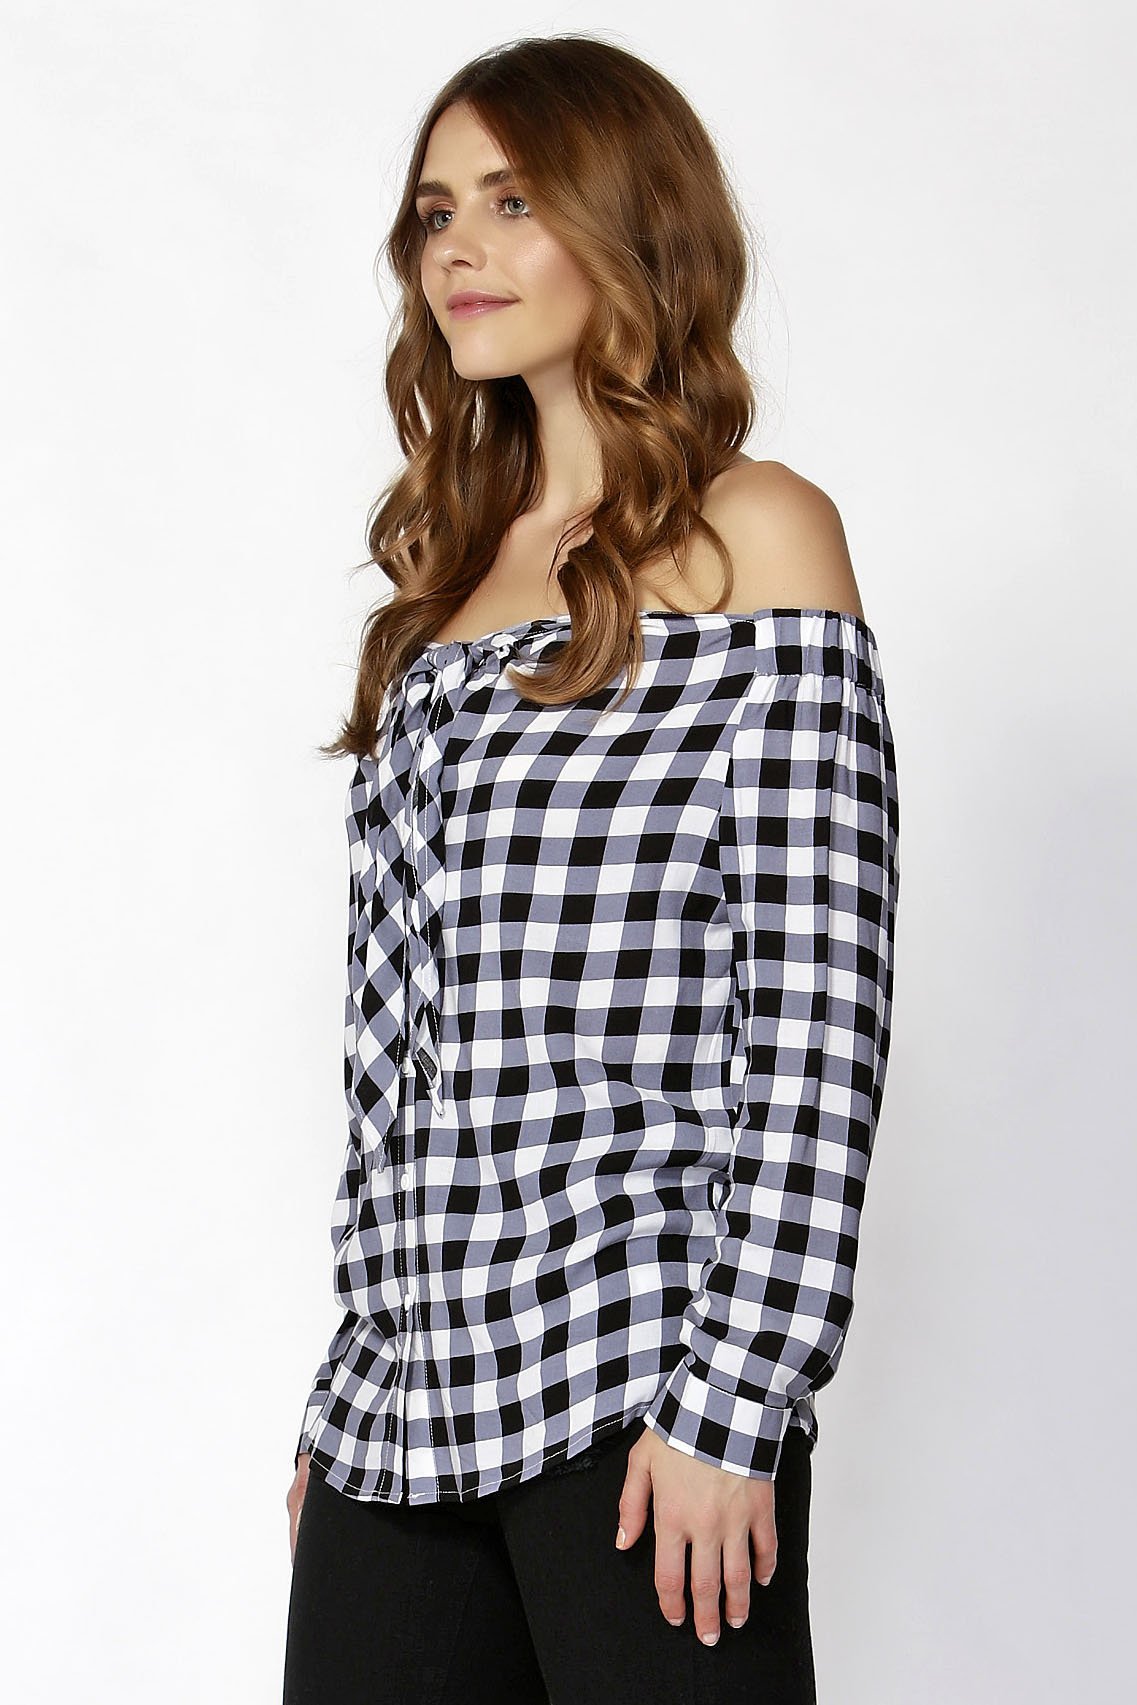 Sass Ricki Bow Front Open Shoulder Top in Black and White Check - Hey Sara